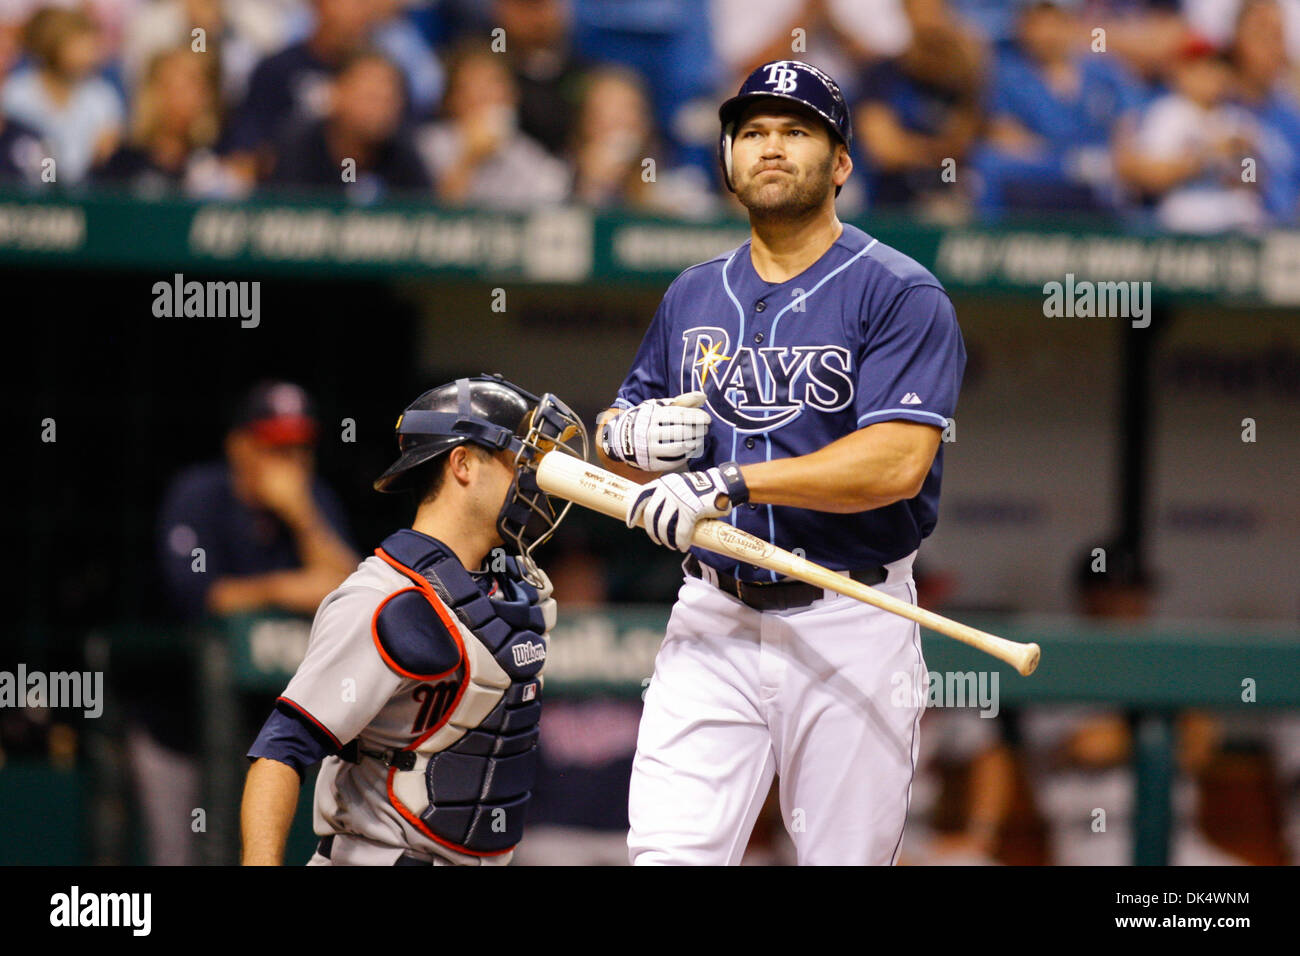 Apr. 14, 2011 - St.Petersburg, Florida, U.S - Tampa Bay Rays left fielder Johnny Damon (22) reacts after swinging for a miss during the match up between the Tampa Bay Rays and the Minnesota Twins at Tropicana Field. The Rays beat the Twins 4-3 in extra innings. (Credit Image: © Luke Johnson/Southcreek Global/ZUMApress.com) Stock Photo